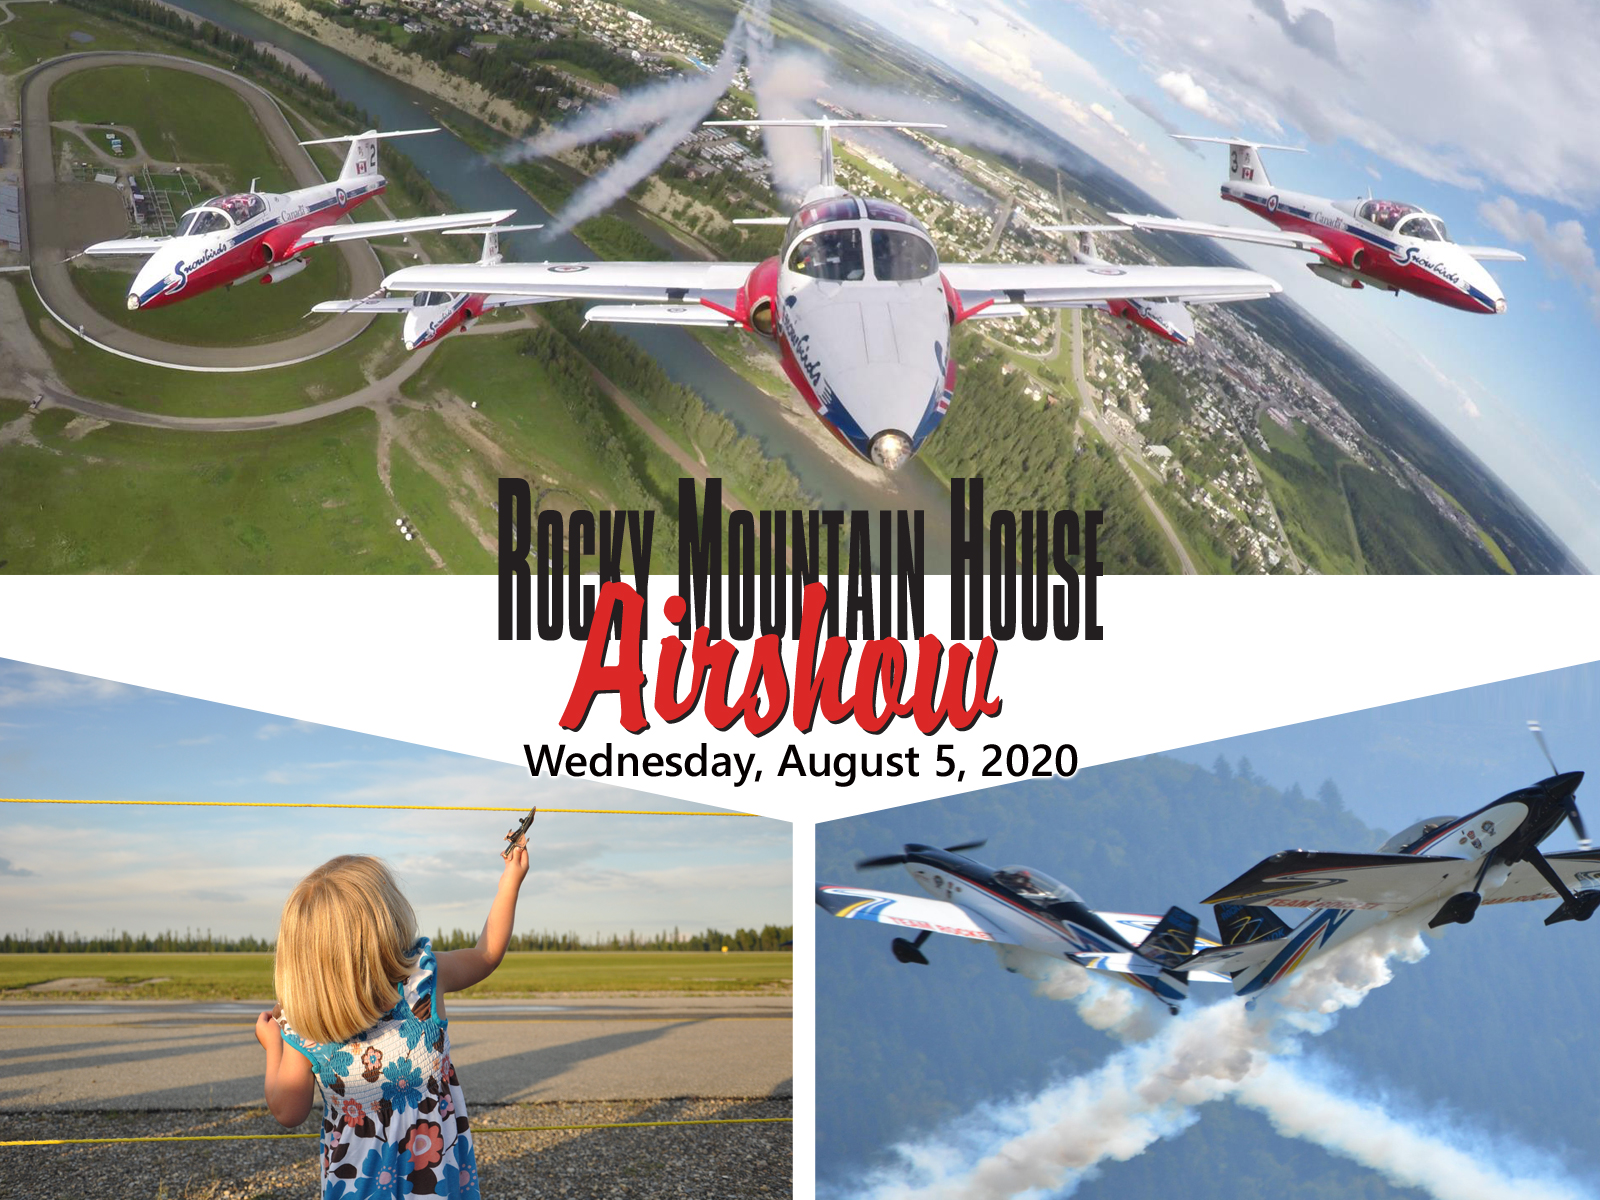 Rocky Mountain House Airshow 2020 (This event has been postponed)